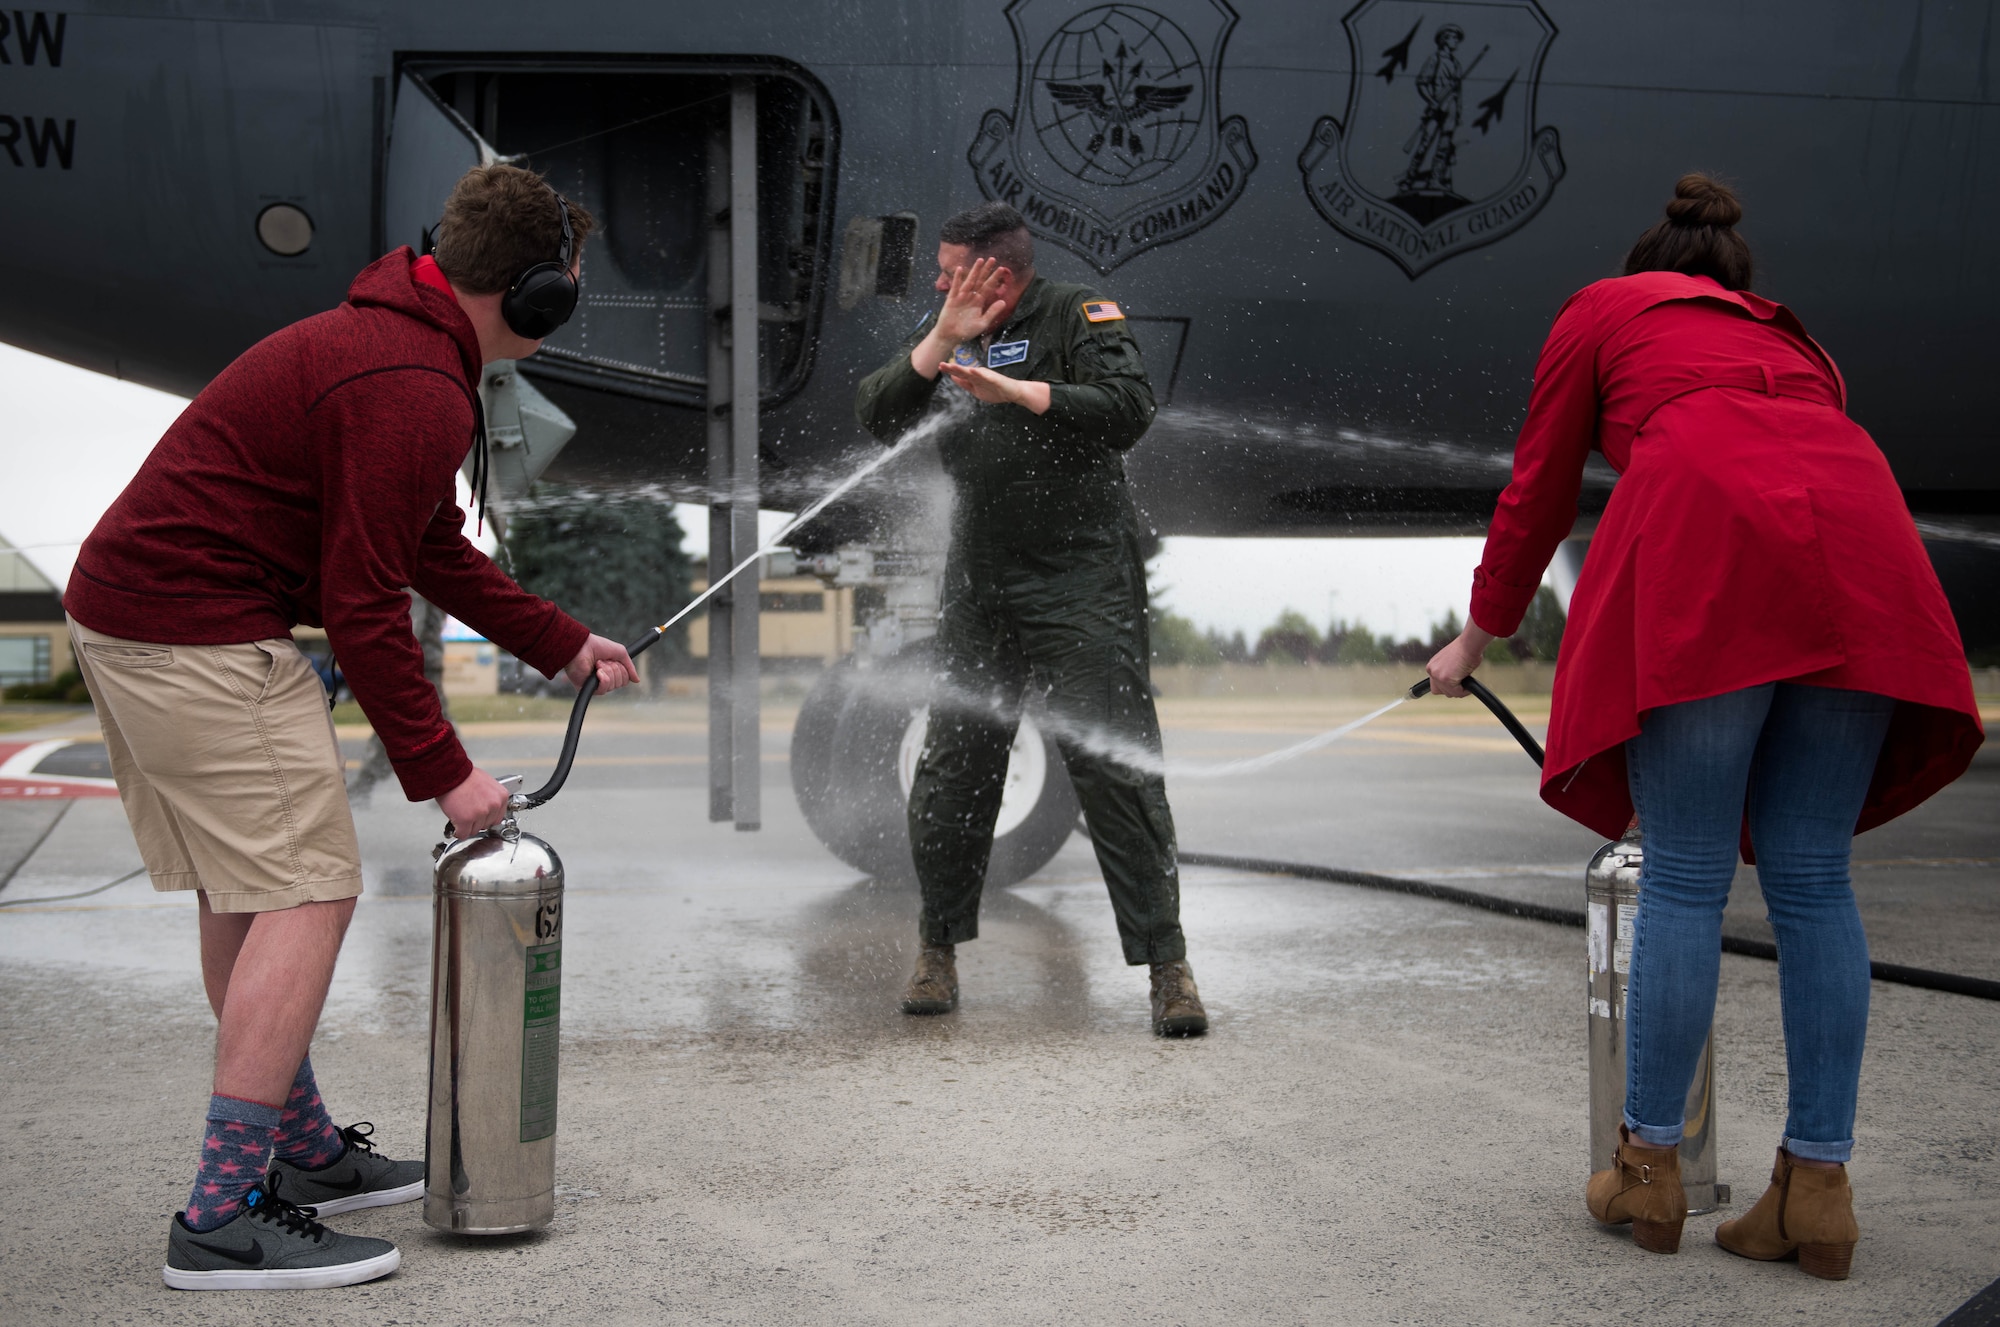 Col. Matthew Fritz, 92nd Air Refueling Wing vice commander, is sprayed with water by his children, Matthew and Taylor, after returning from his final flight as vice commander June 15, 2017, at Fairchild Air Force Base, Washington. Fritz was joined by his family and various members of Team Fairchild to celebrate. (U.S. Air Force photo/Senior Airman Sean Campbell)